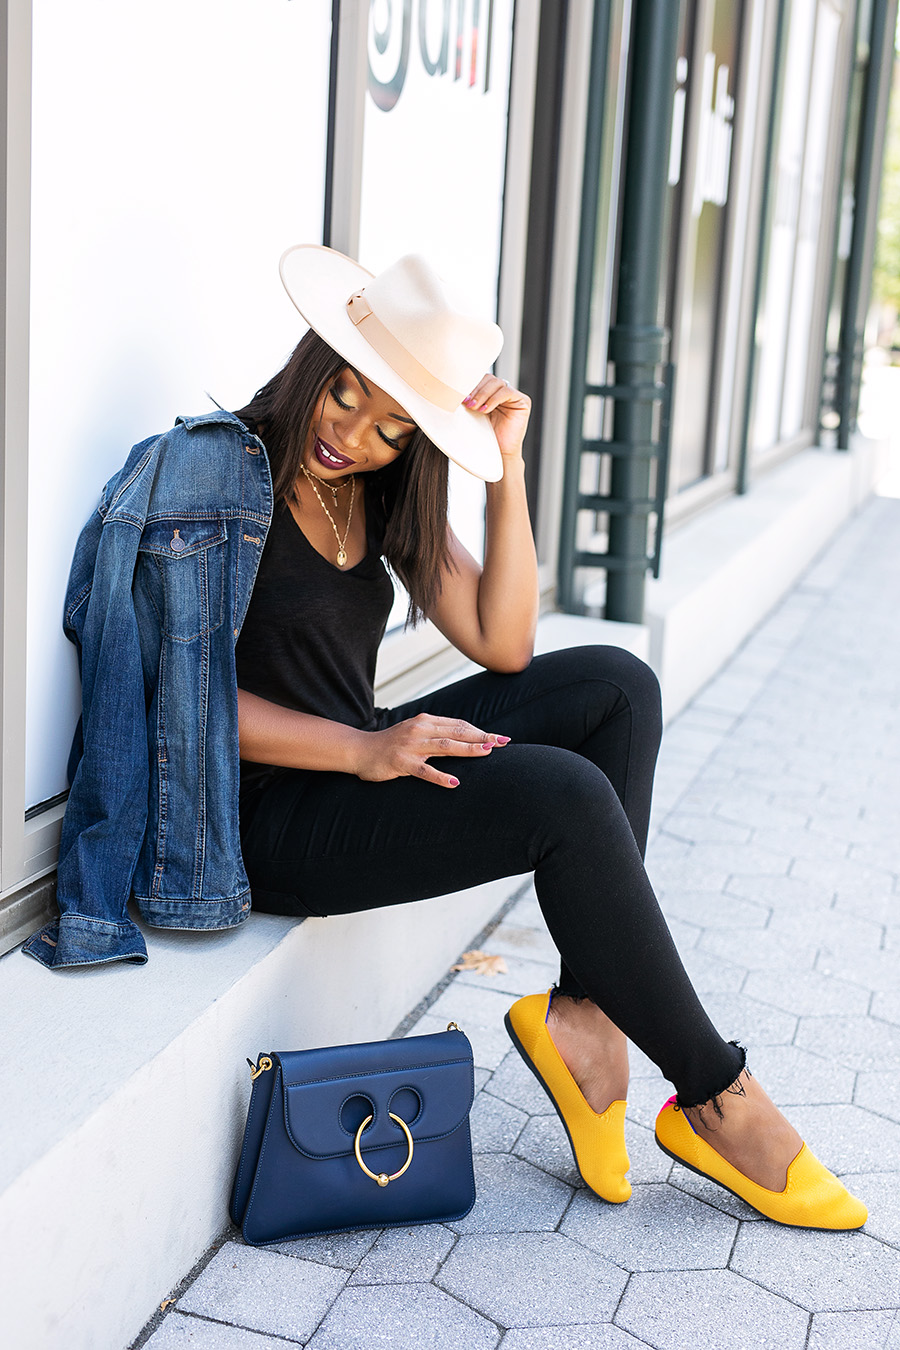 Stella-adewunmi-of-jadore-fashion-shares-casual-comfortable-outfits-rothys-loafers-black-jeans-wool-hat